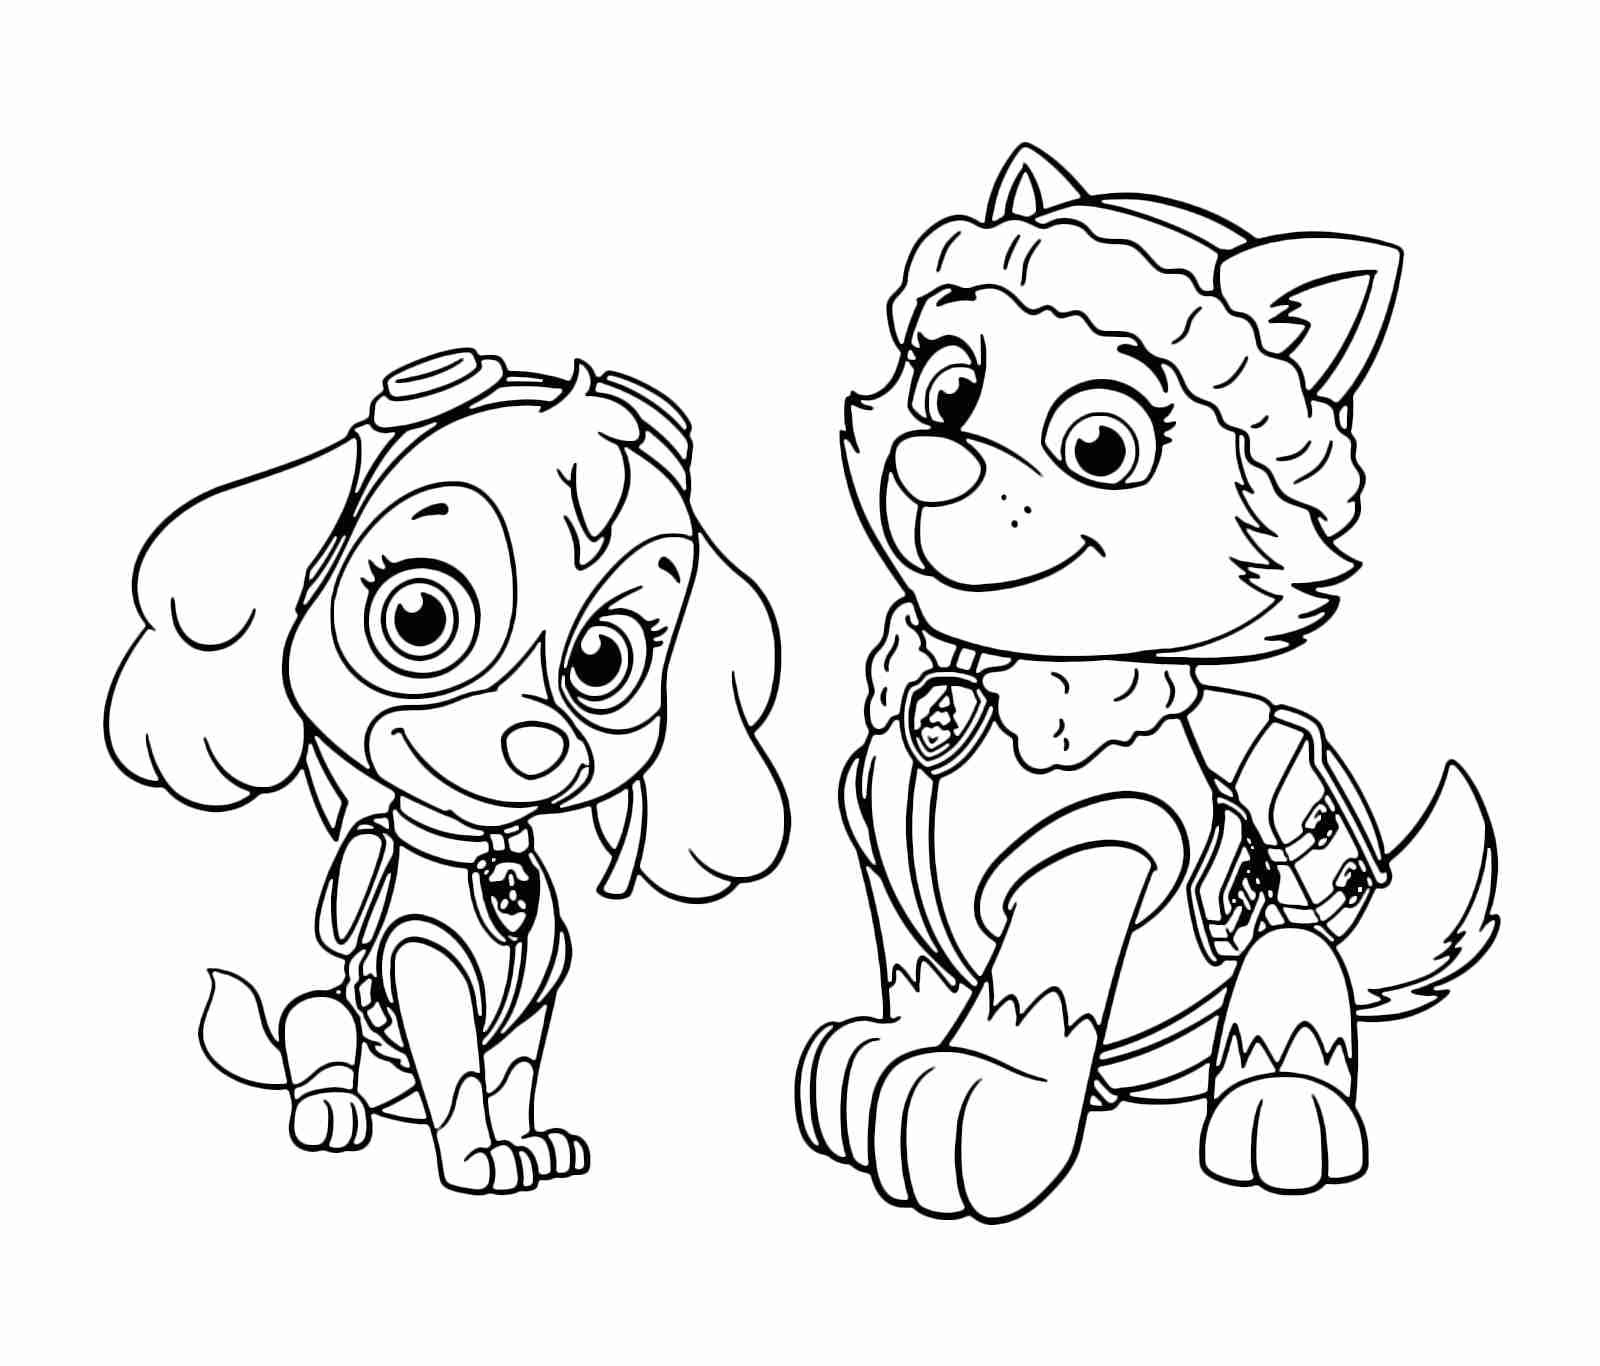 paw patrol zuma coloring pages at getcolorings  free